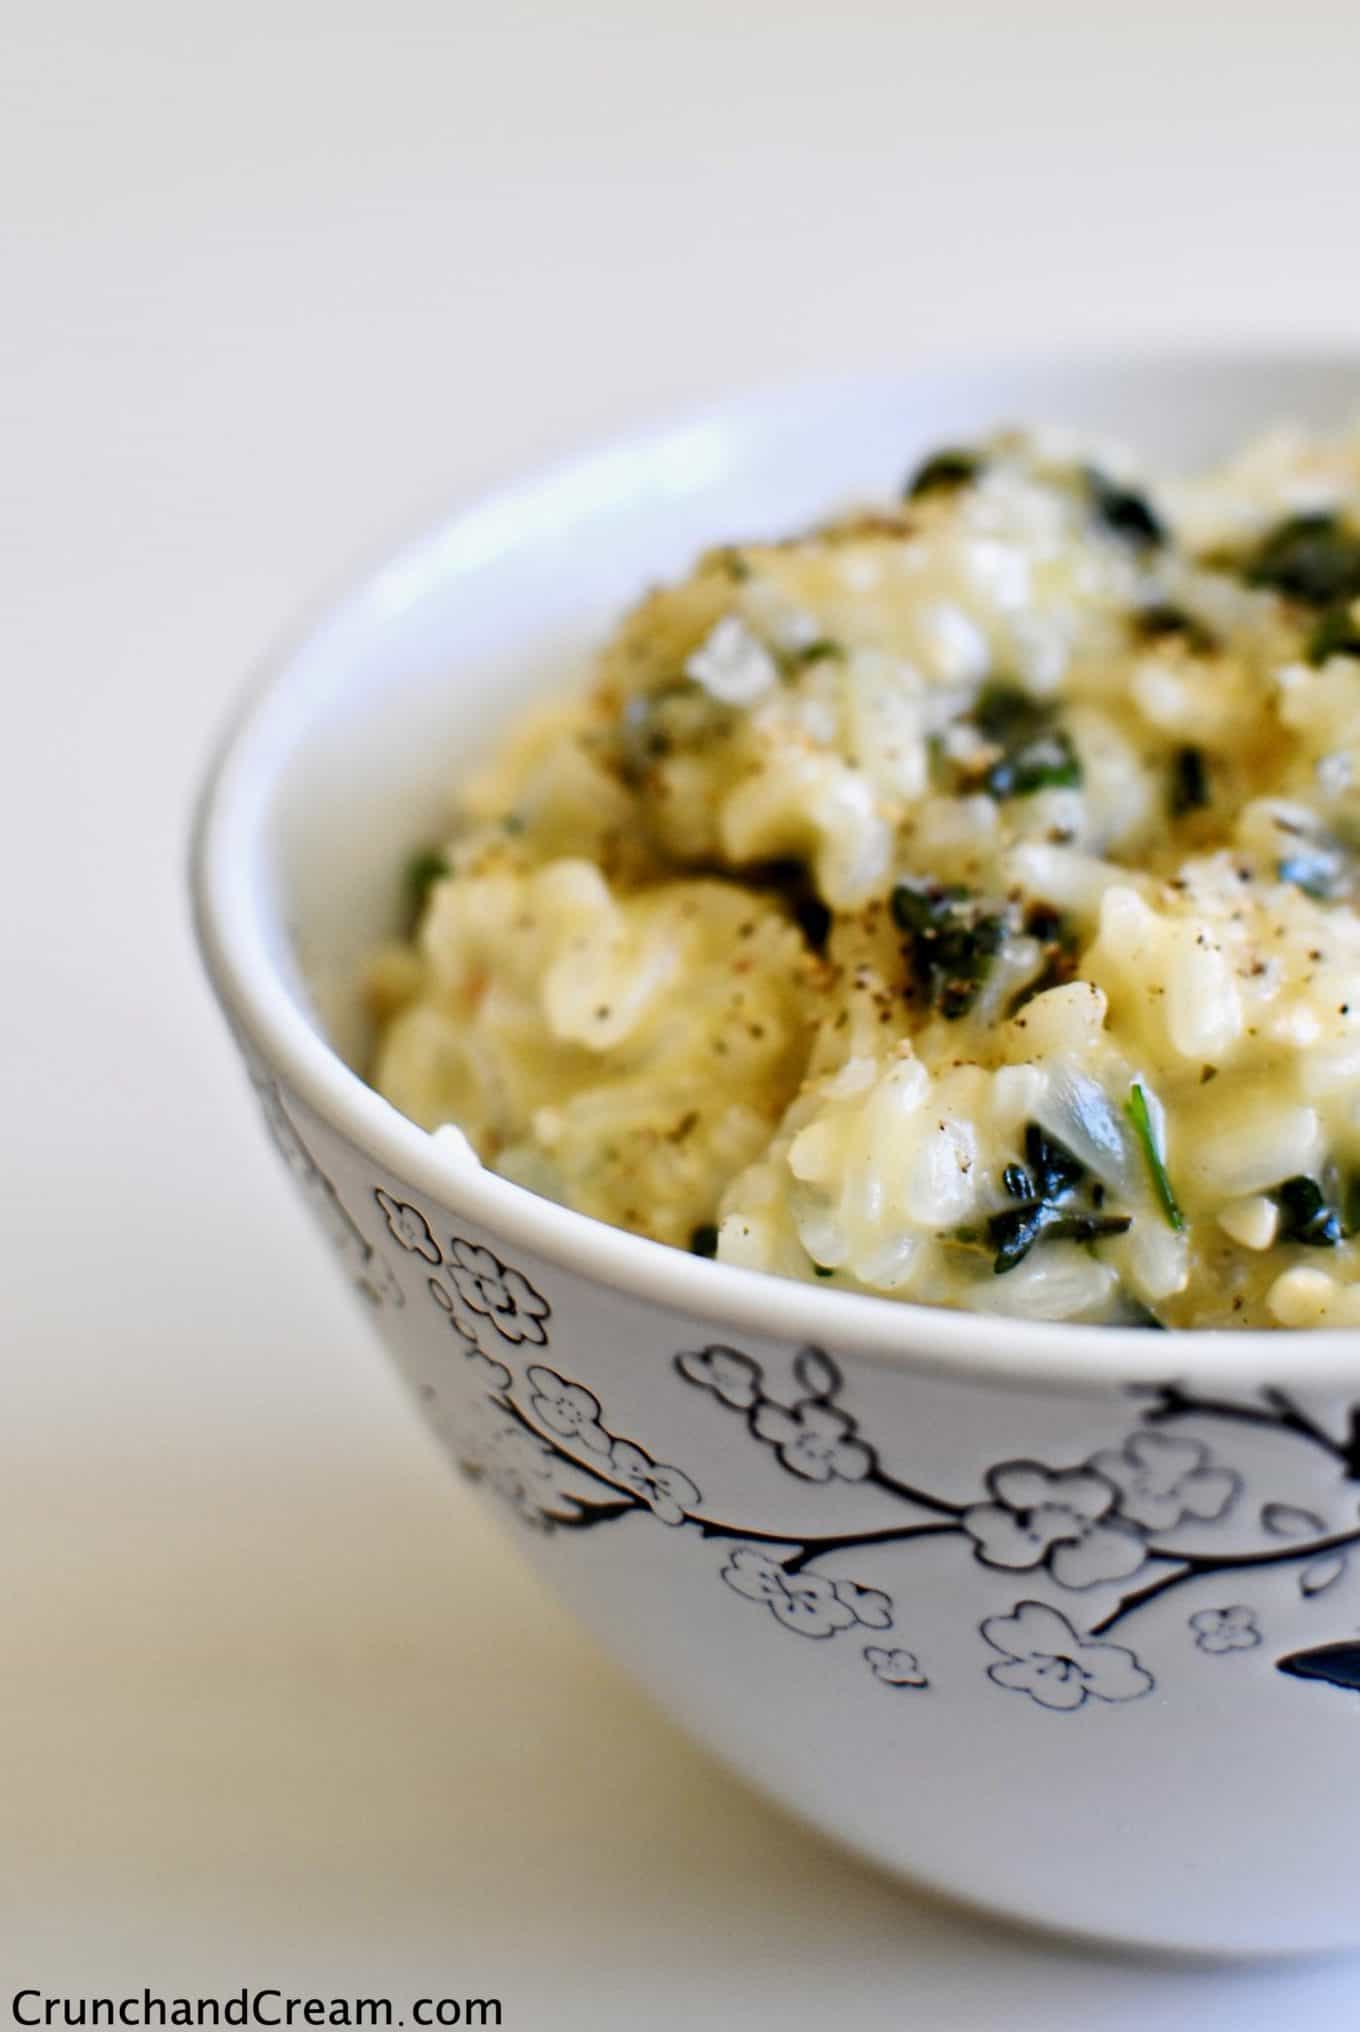 A close-up of a bowl full of creamy risotto with chopped green herbs in.